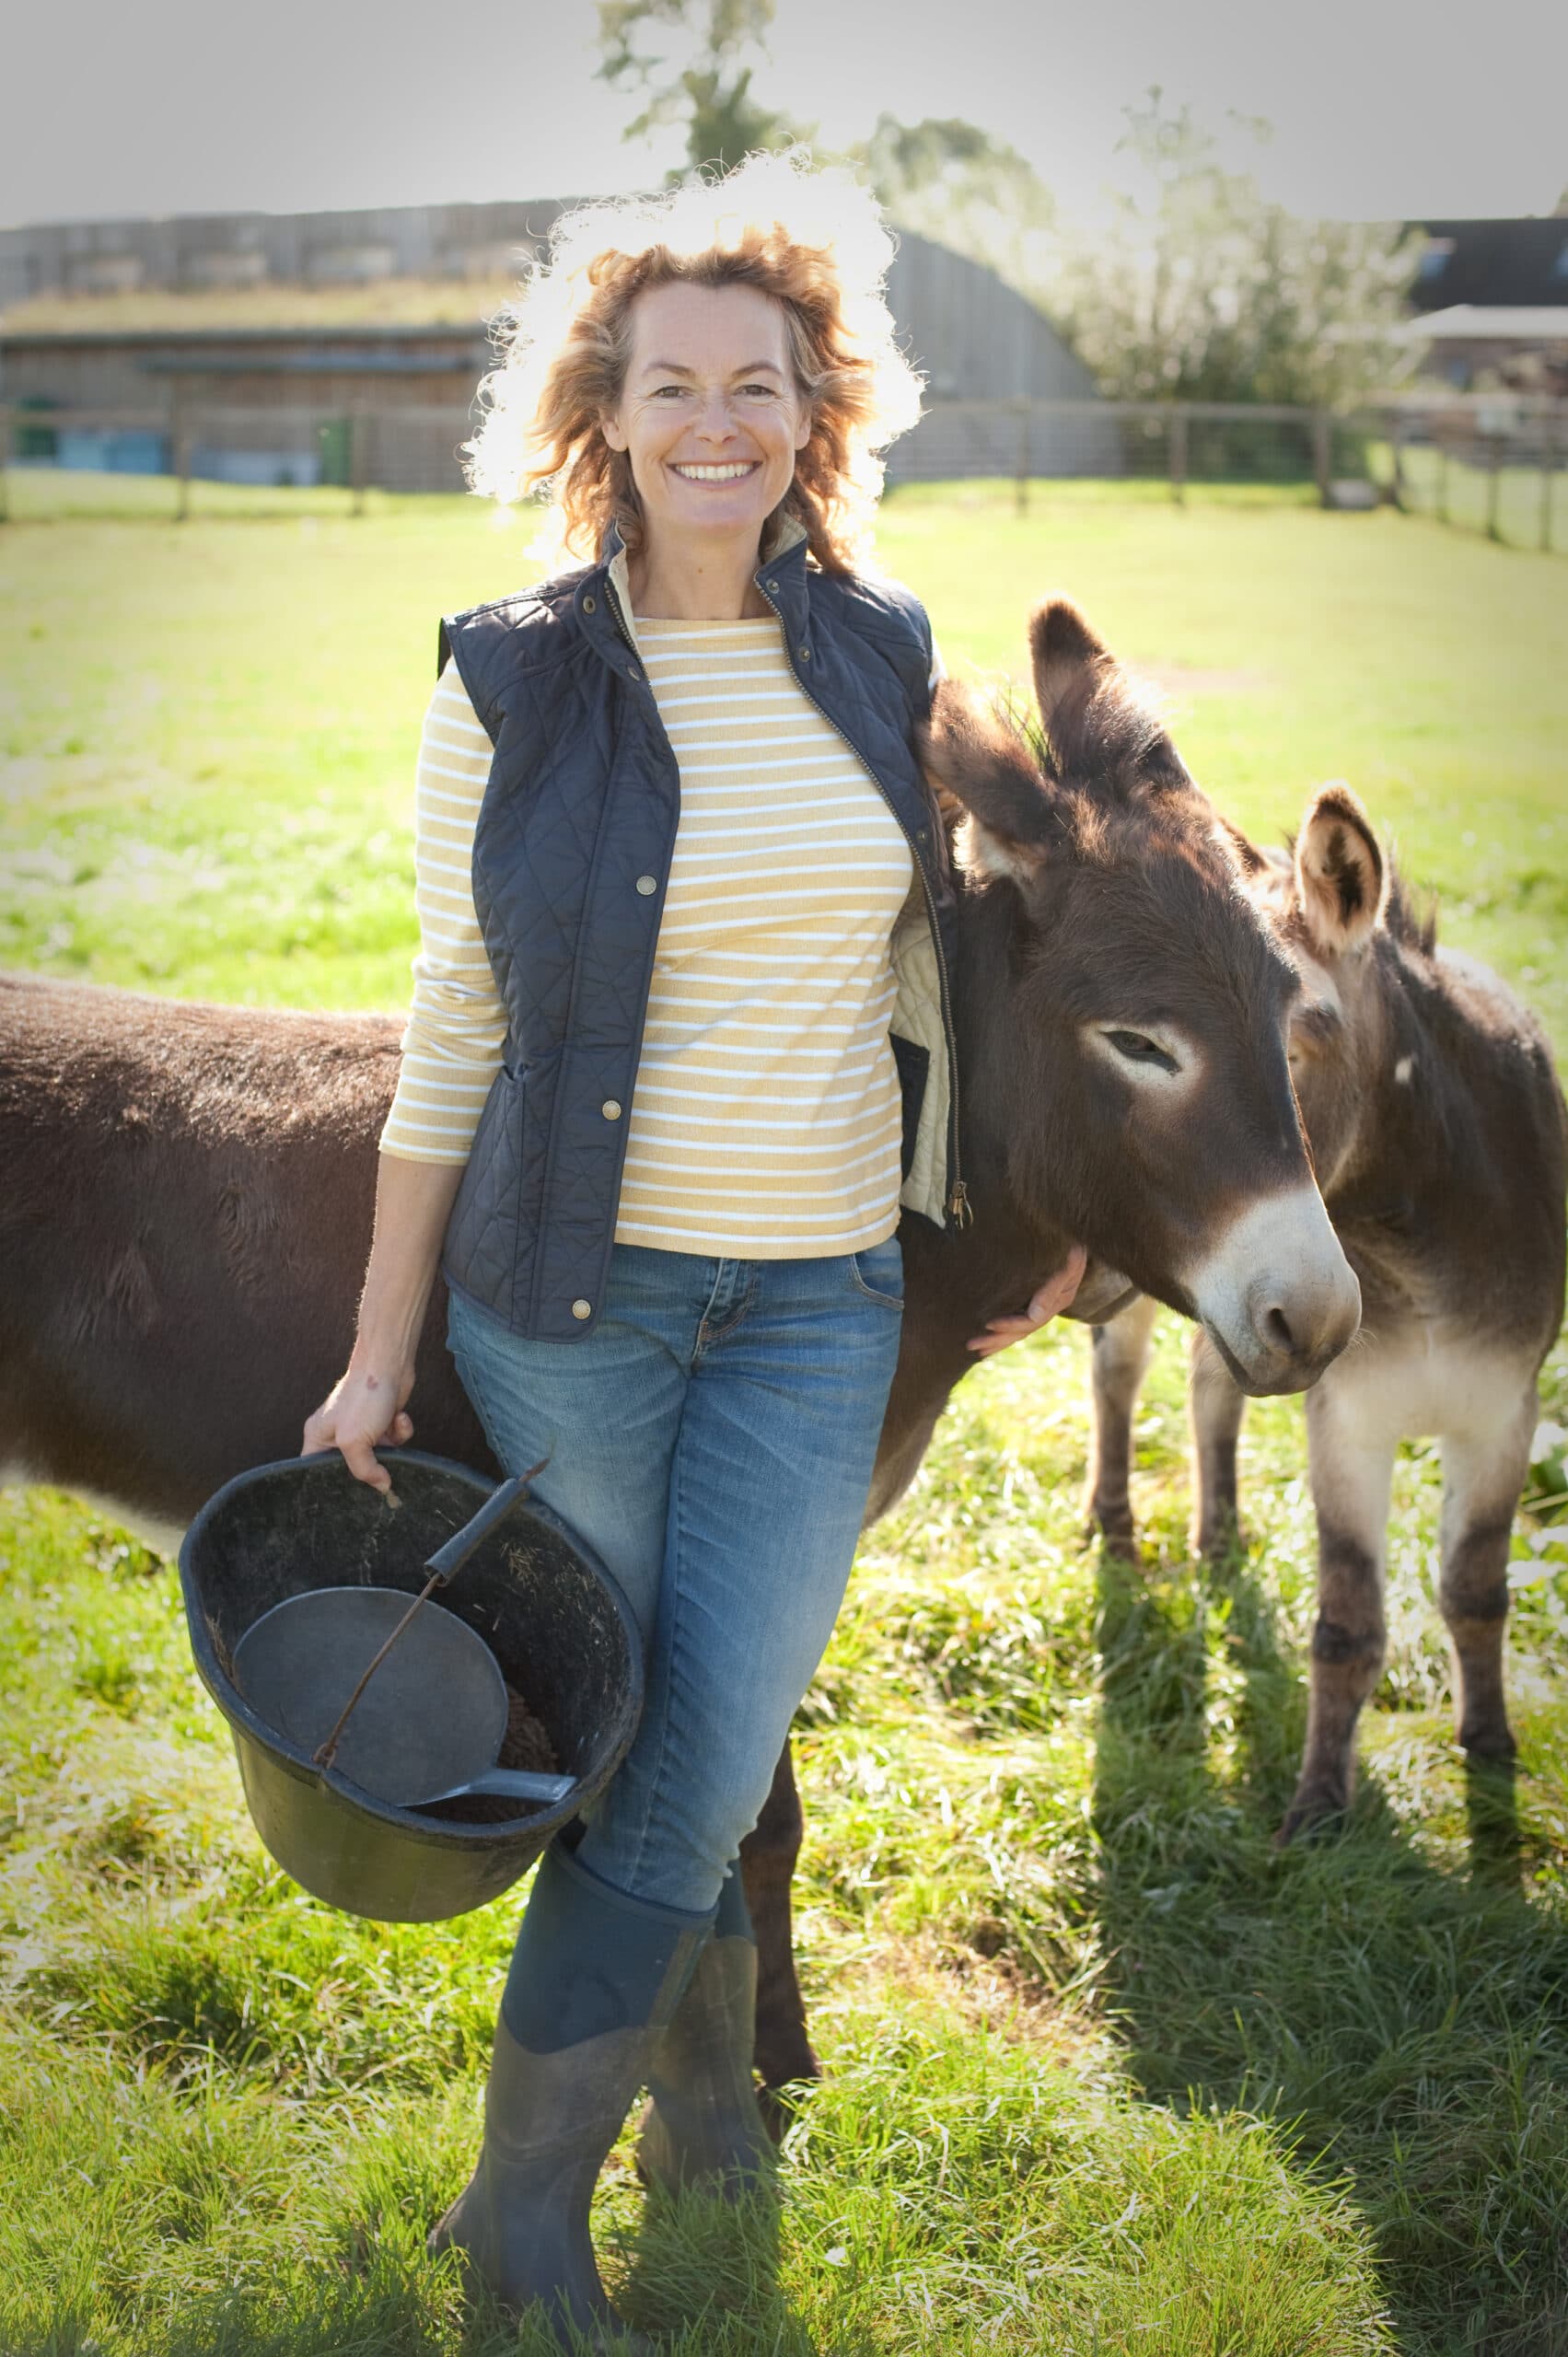 Kate humble interview